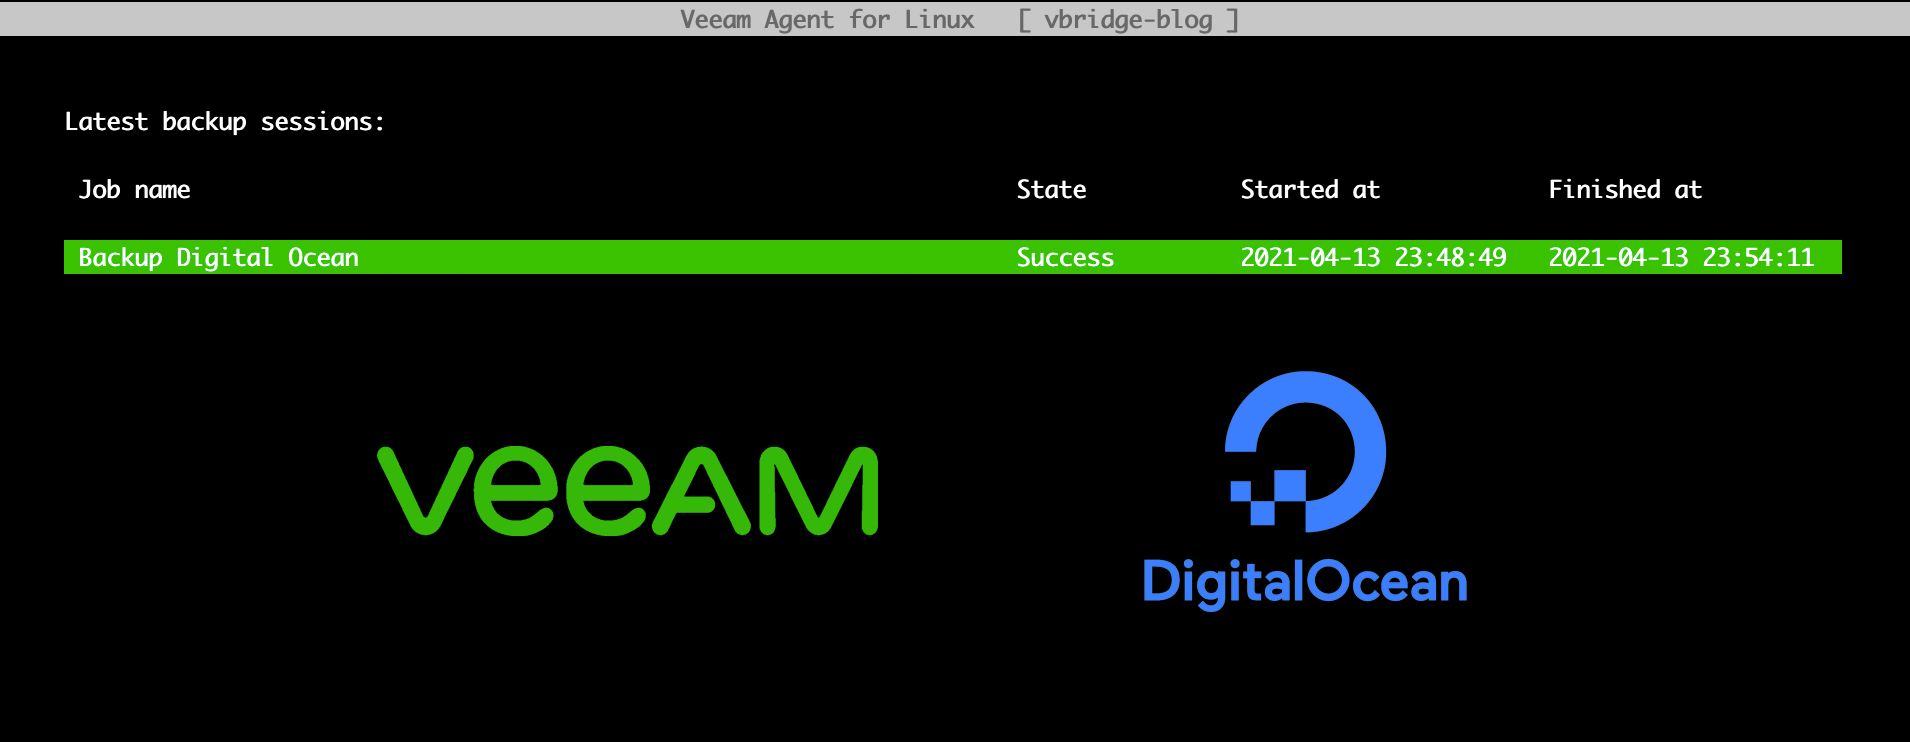 Backup Digital Ocean with Veeam Agent for Linux